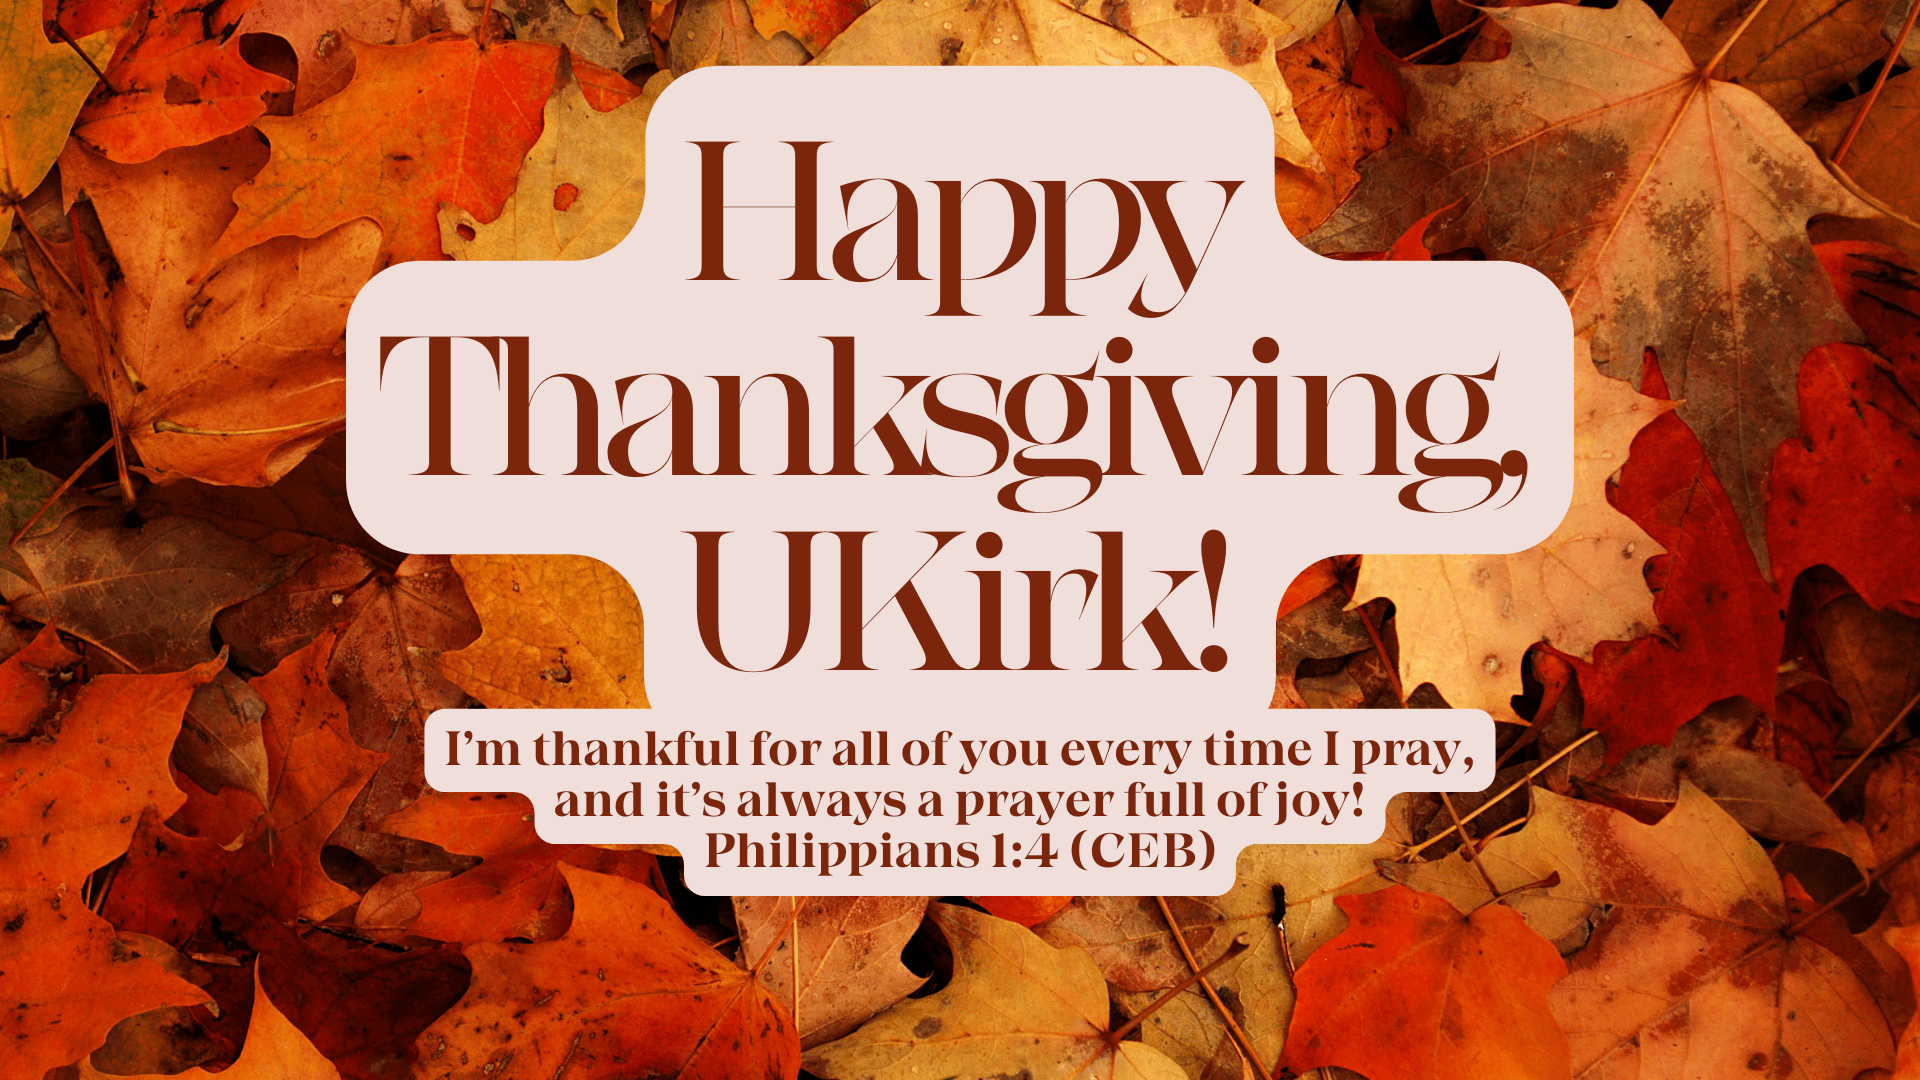 Happy Thanksgiving from UKirk!